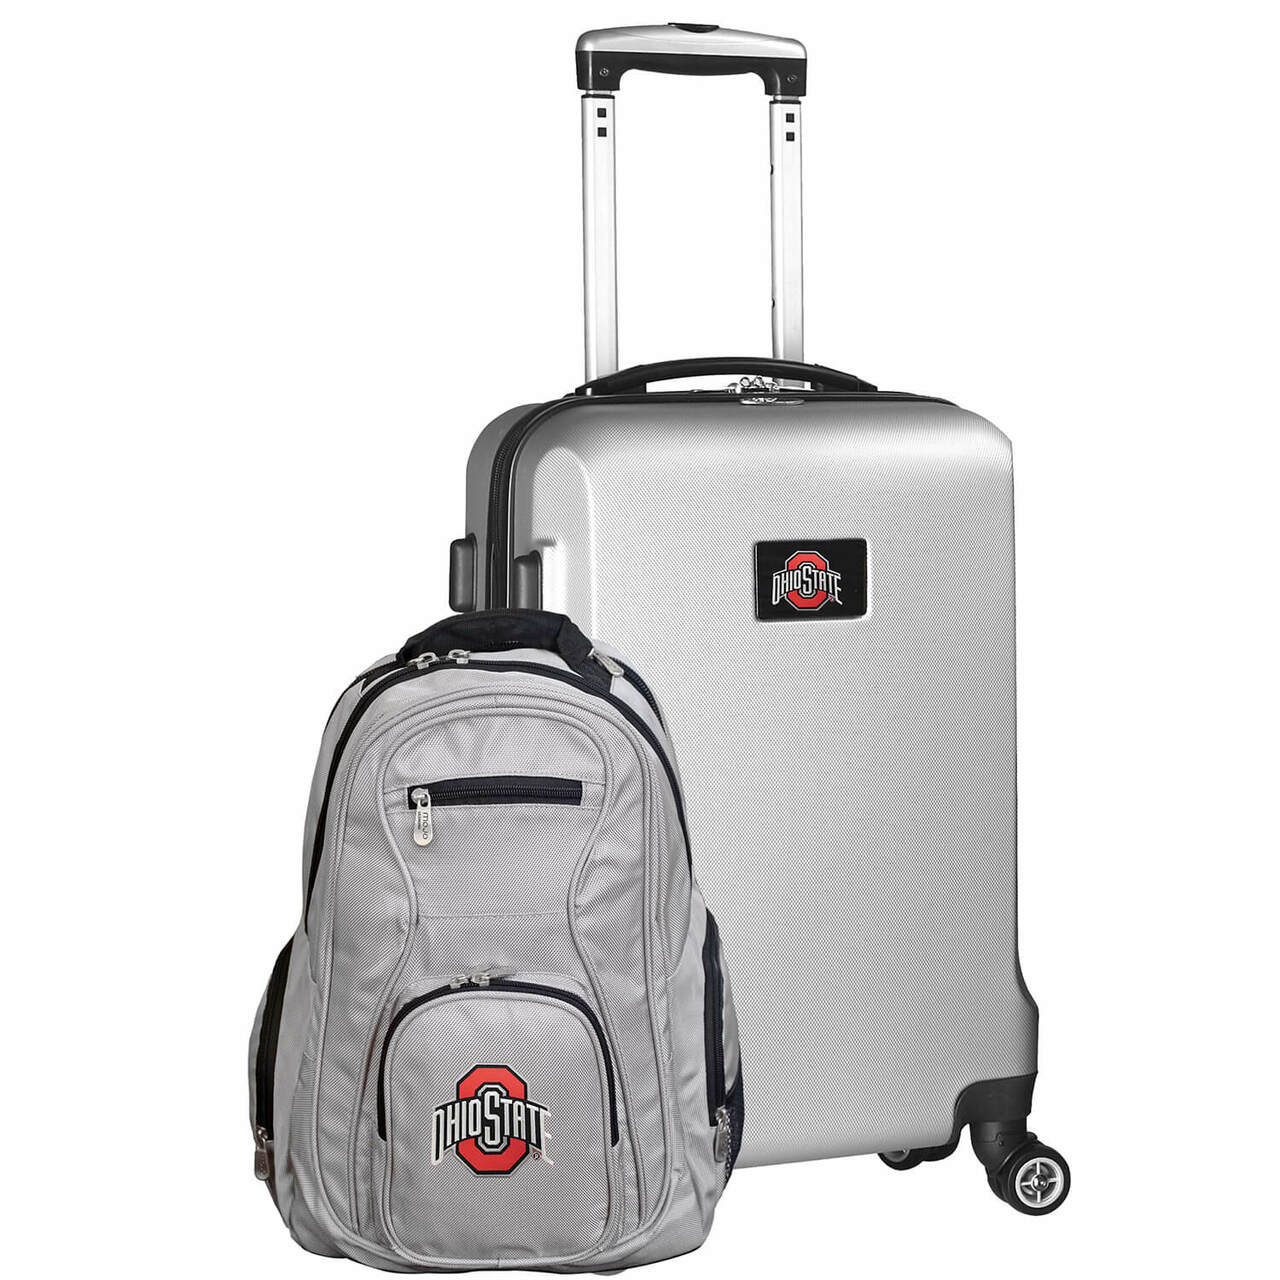 Ohio State University Buckeyes Deluxe 2-Piece Backpack and Carry on Set